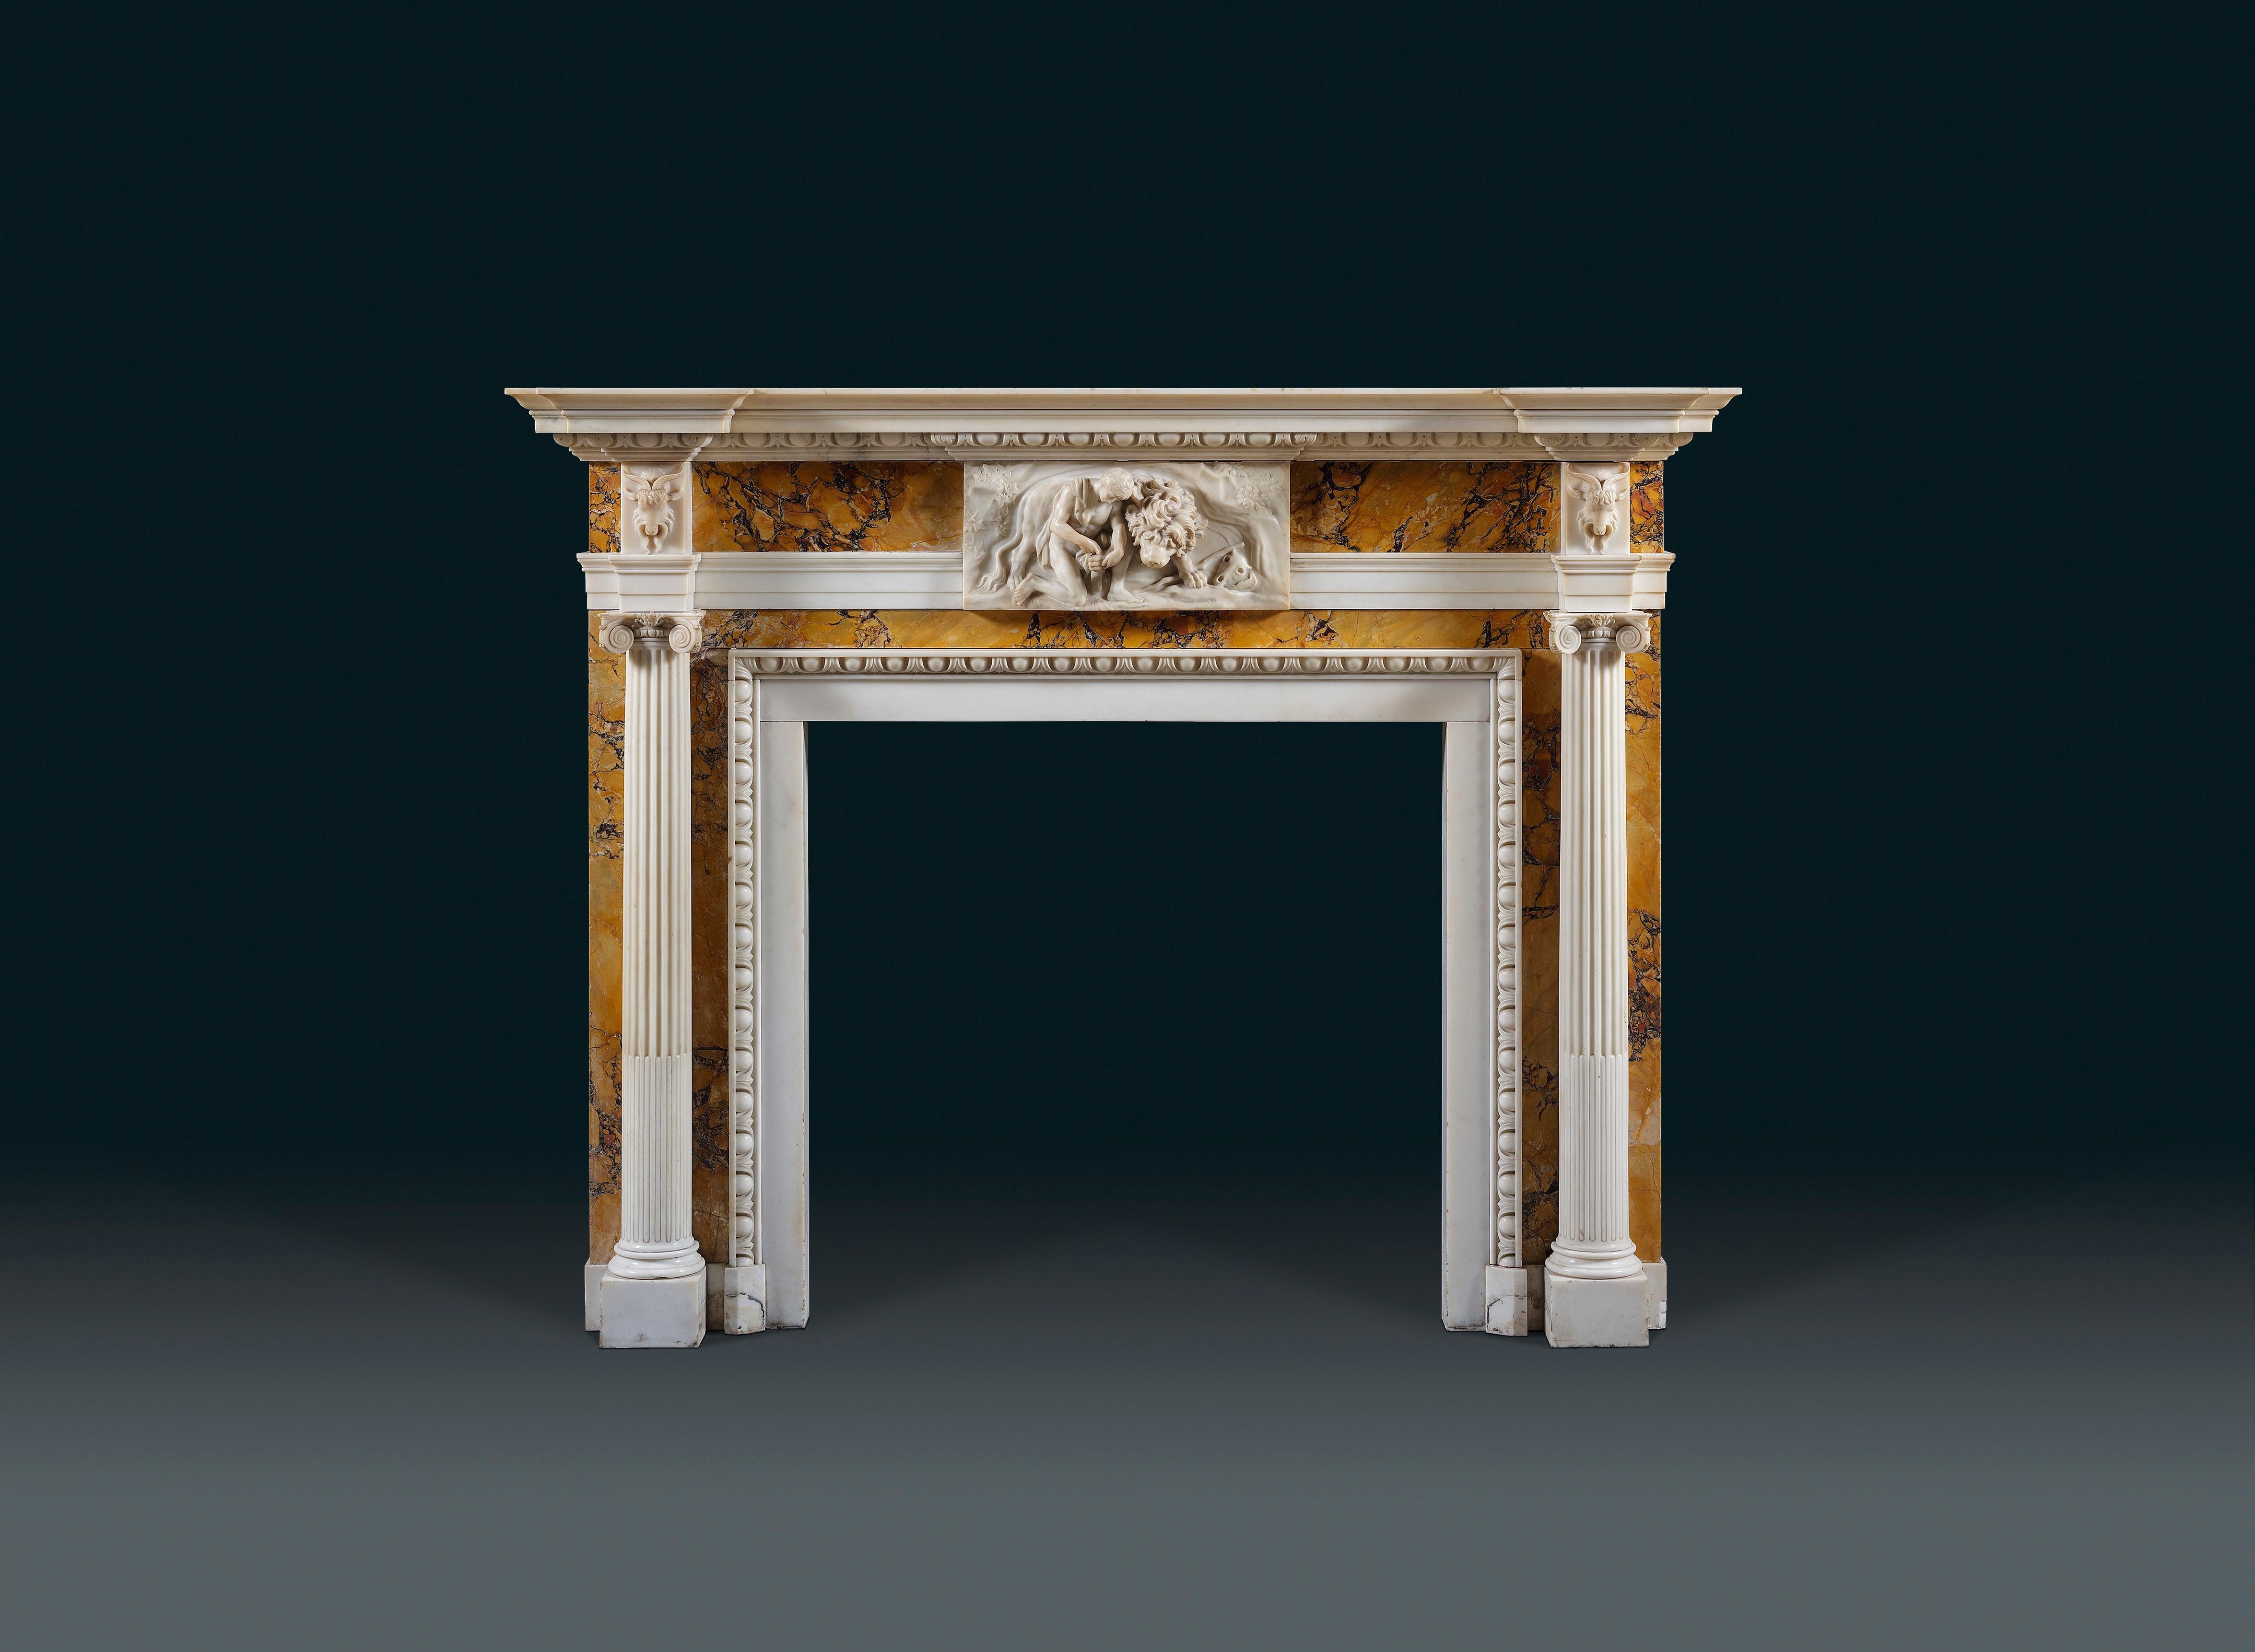 This striking fireplace boasts a finely carved centre tablet depicting a scene from the story of Androcles and the Lion. The frieze is supported by a pair of free-standing, fluted, ionic columns, beneath distinctive goat-mask end-blocks.

The